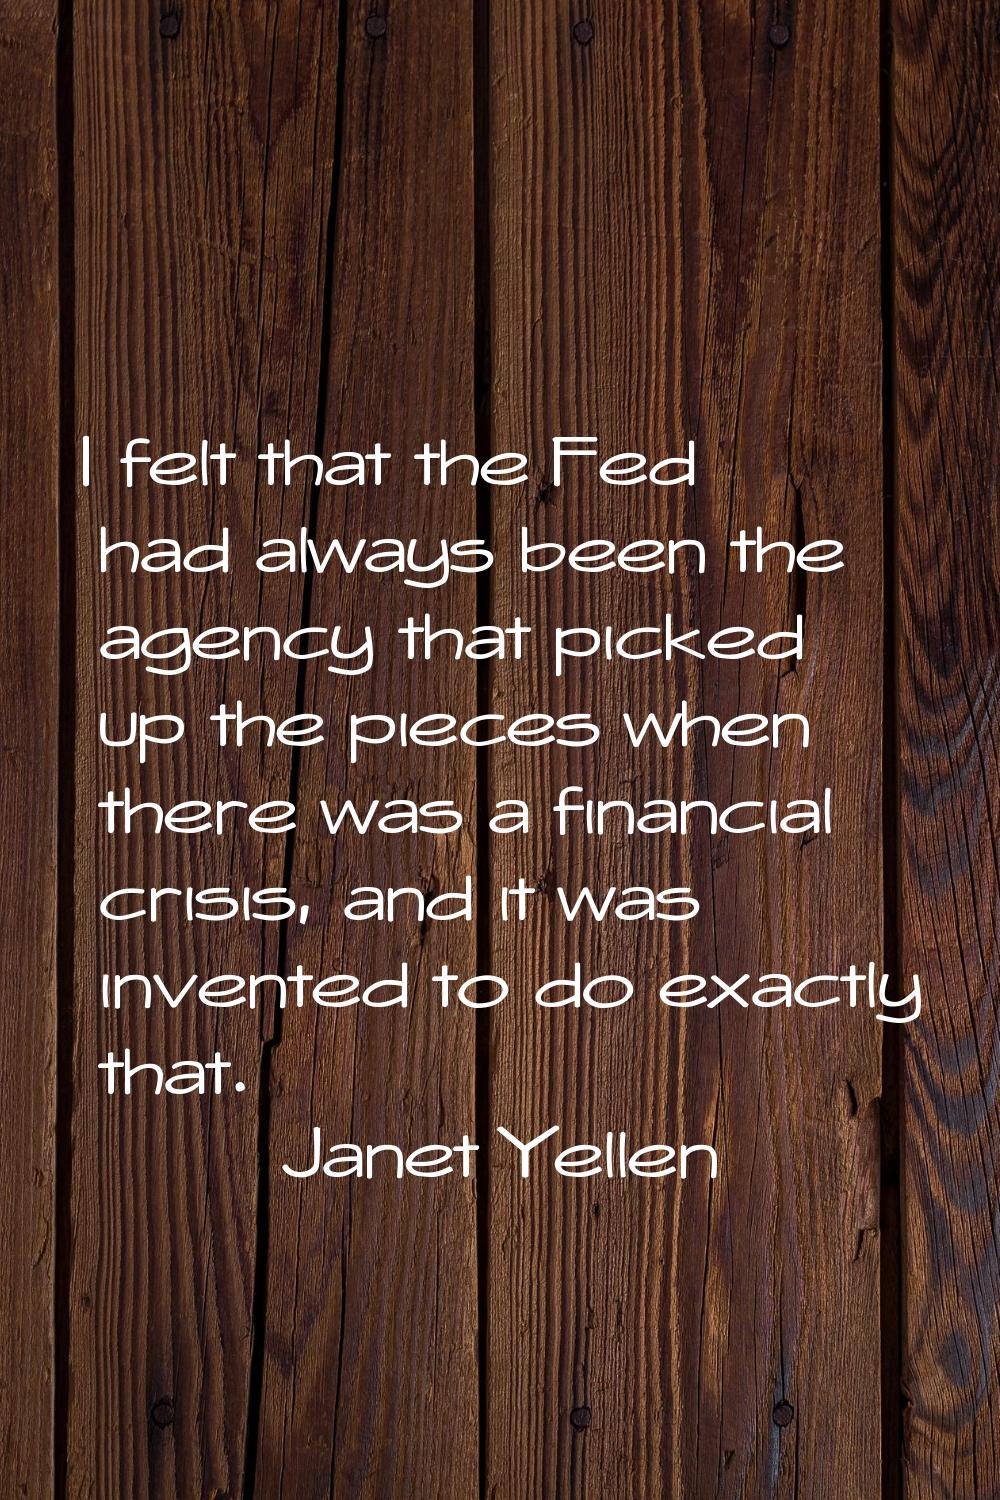 I felt that the Fed had always been the agency that picked up the pieces when there was a financial